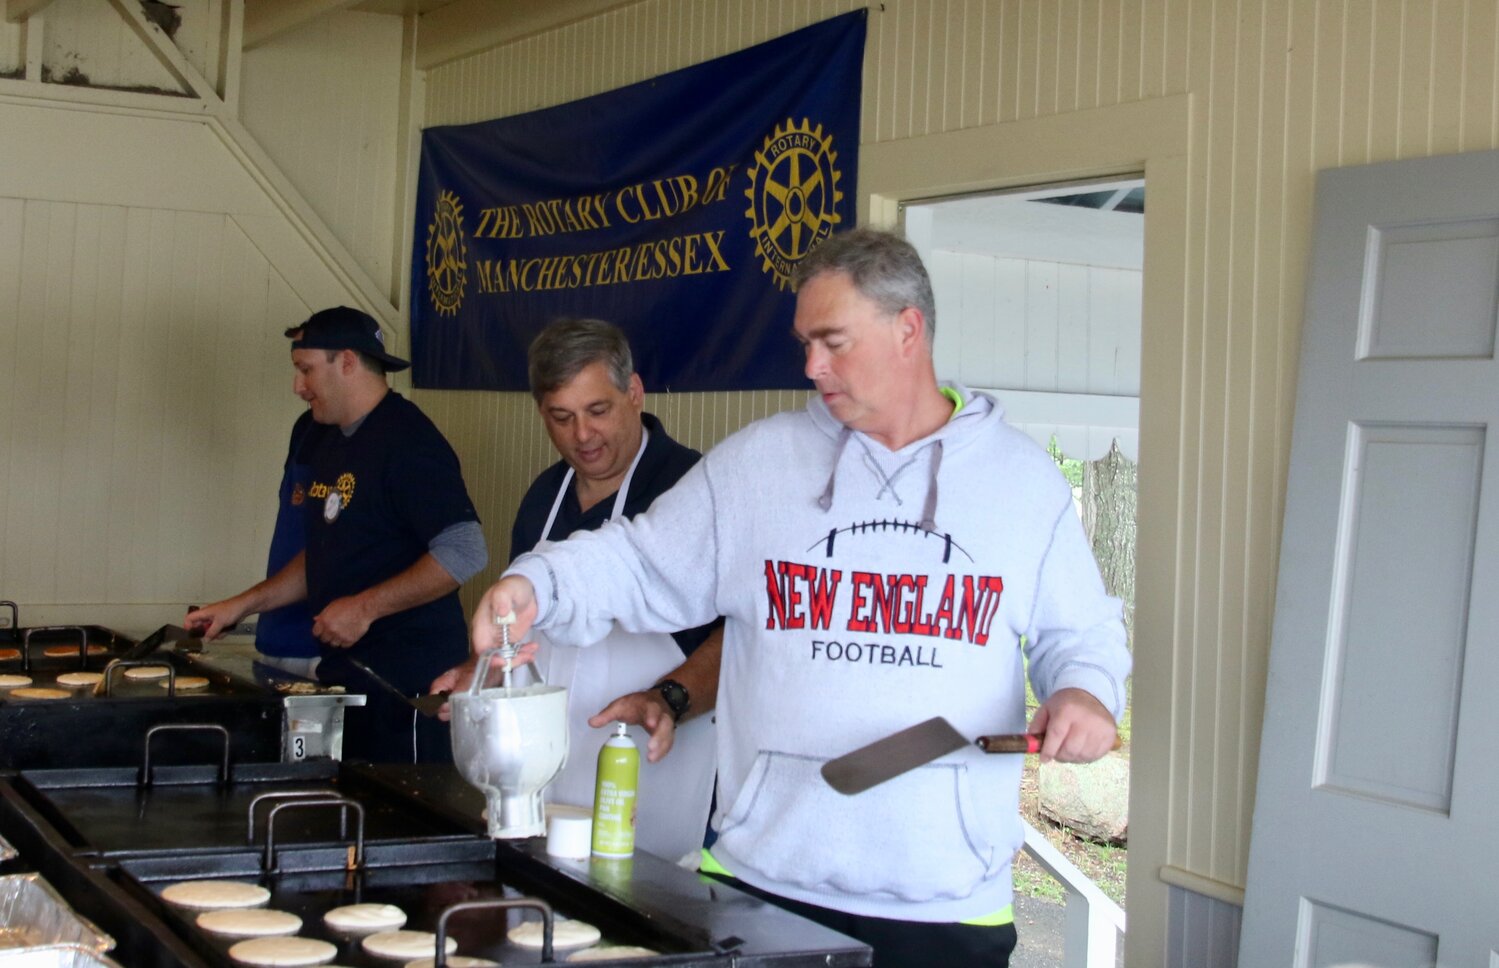 Senator Bruce Tarr and Representative Brad Hill ably manned the pancake station on the Rotary's Red White &amp; Blue breakfast. Turnout was great - even with an iffy weather report. 